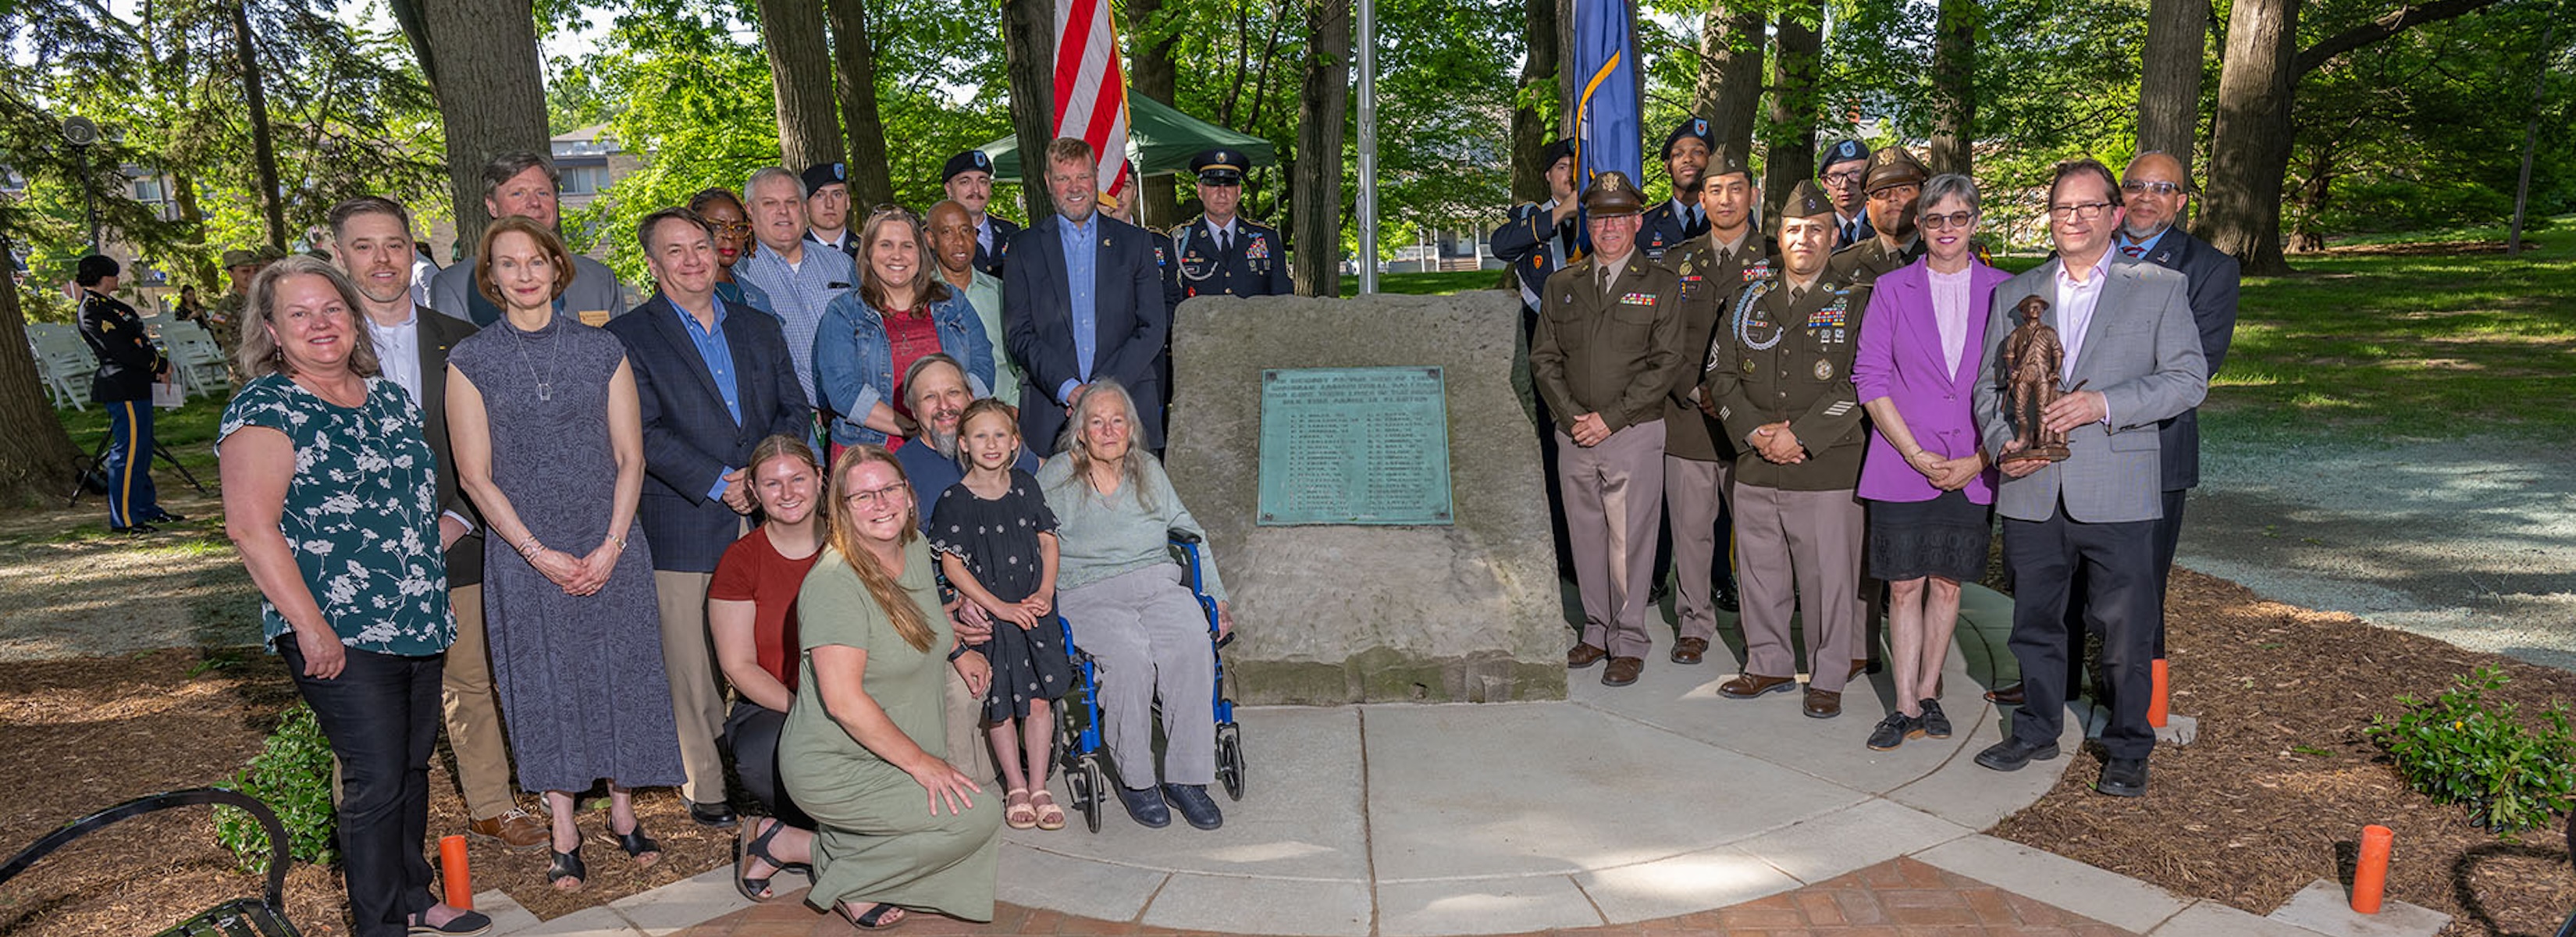 Group photo around the memorial plaque with Michigan State University leaders, staff, community members and Michigan Veterans Affairs staff